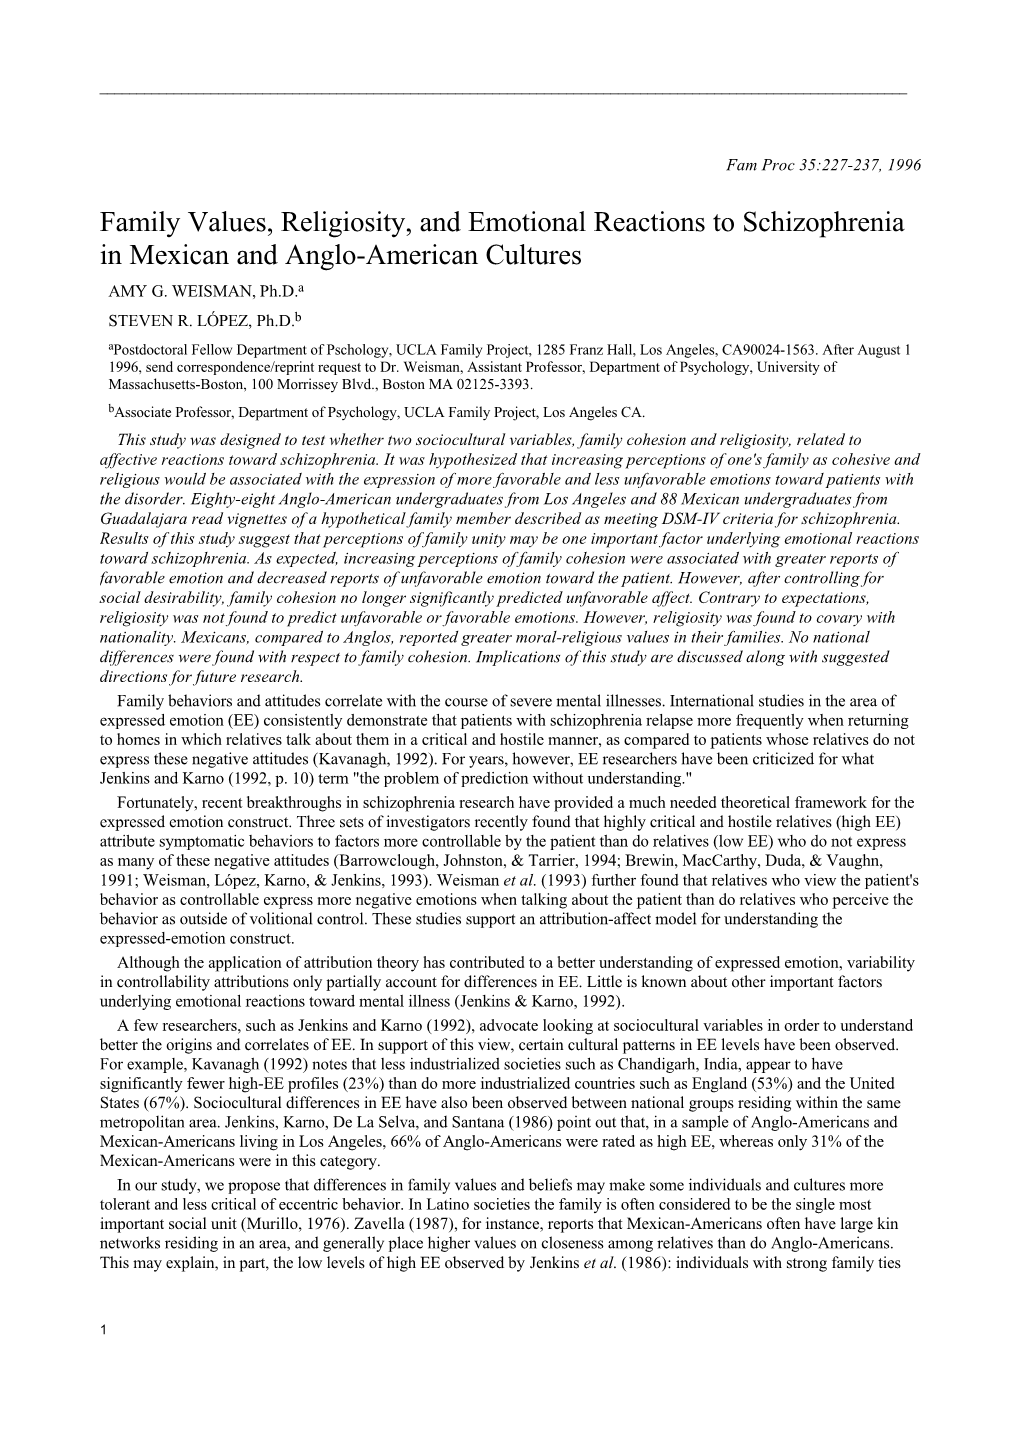 Family Values, Religiosity, and Emotional Reactions to Schizophrenia in Mexican and Anglo-American Cultures AMY G